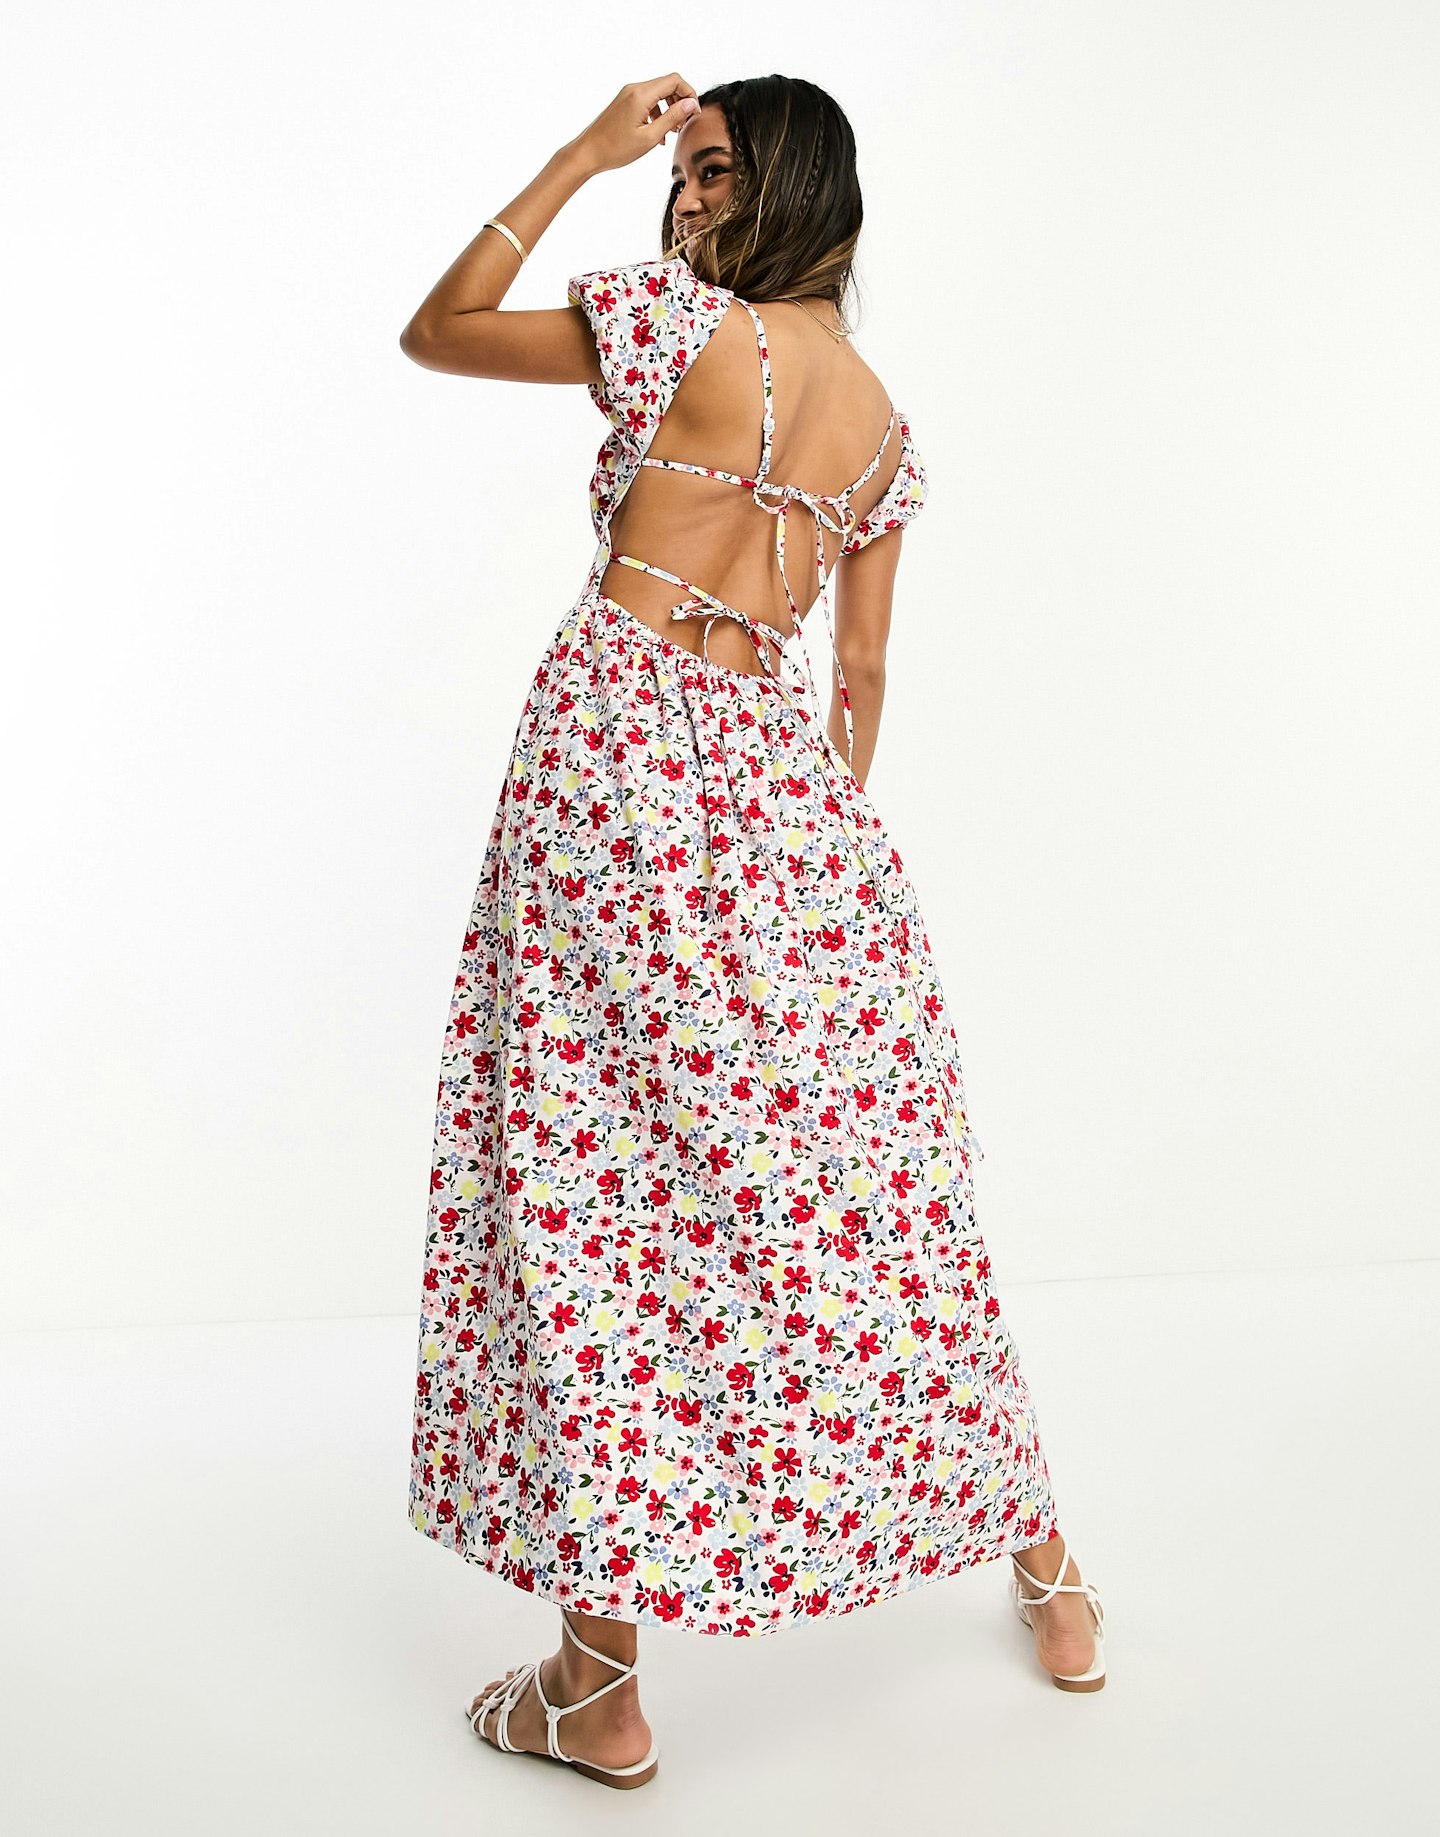 ASOS DESIGN milkmaid ruched bust midi dress with open tie back in bright floral print £36.00